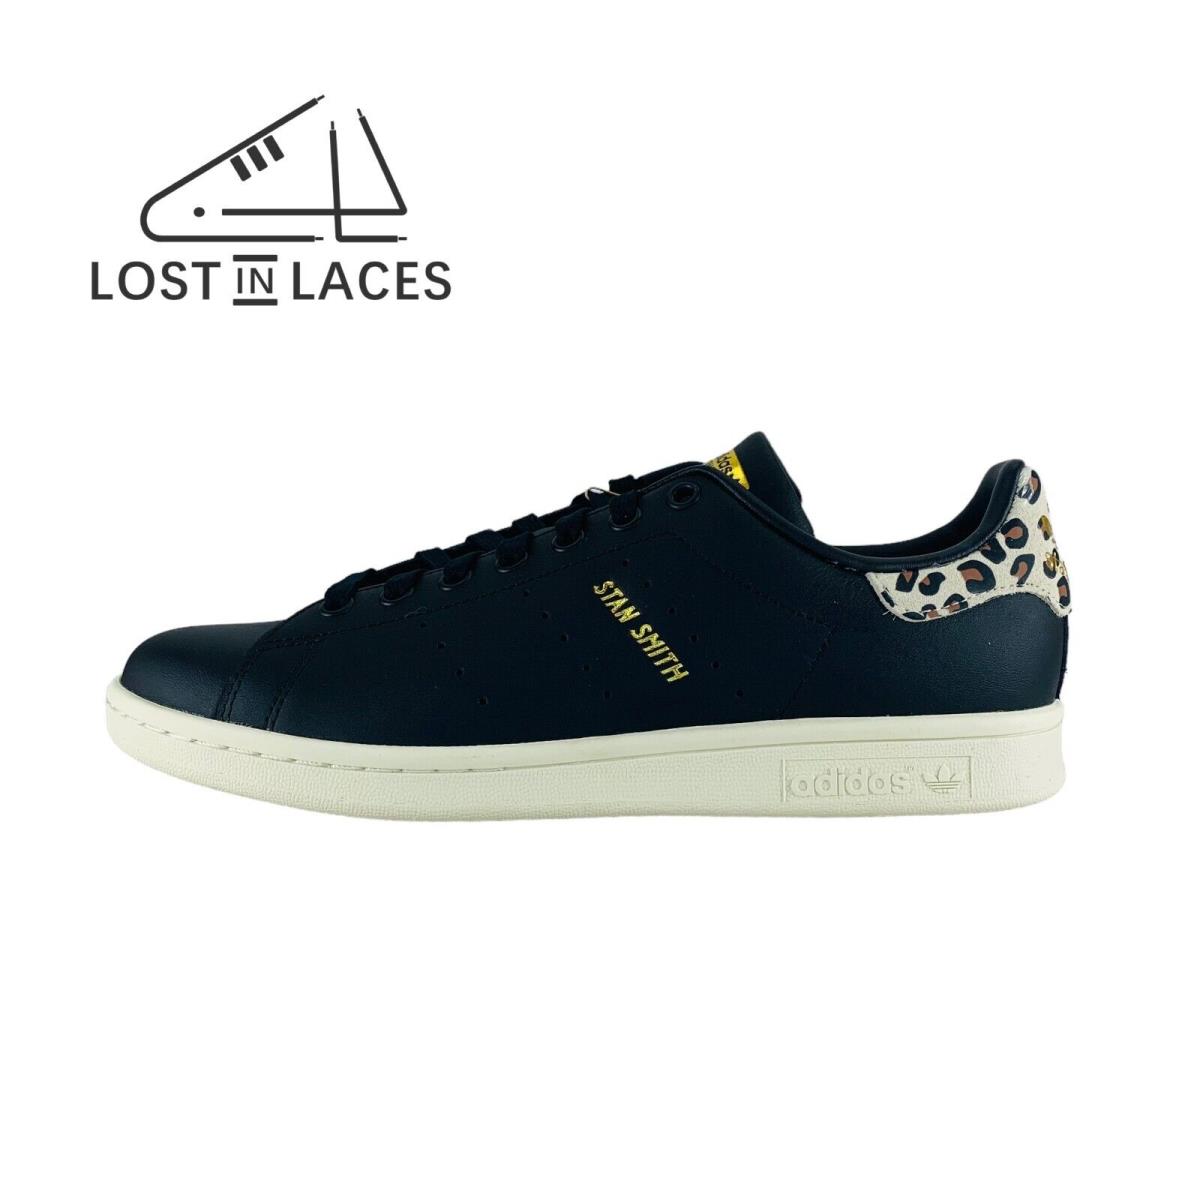 Adidas Stan Smith Black Leopard Print Sneakers Shoes IE4633 Women`s Sizes